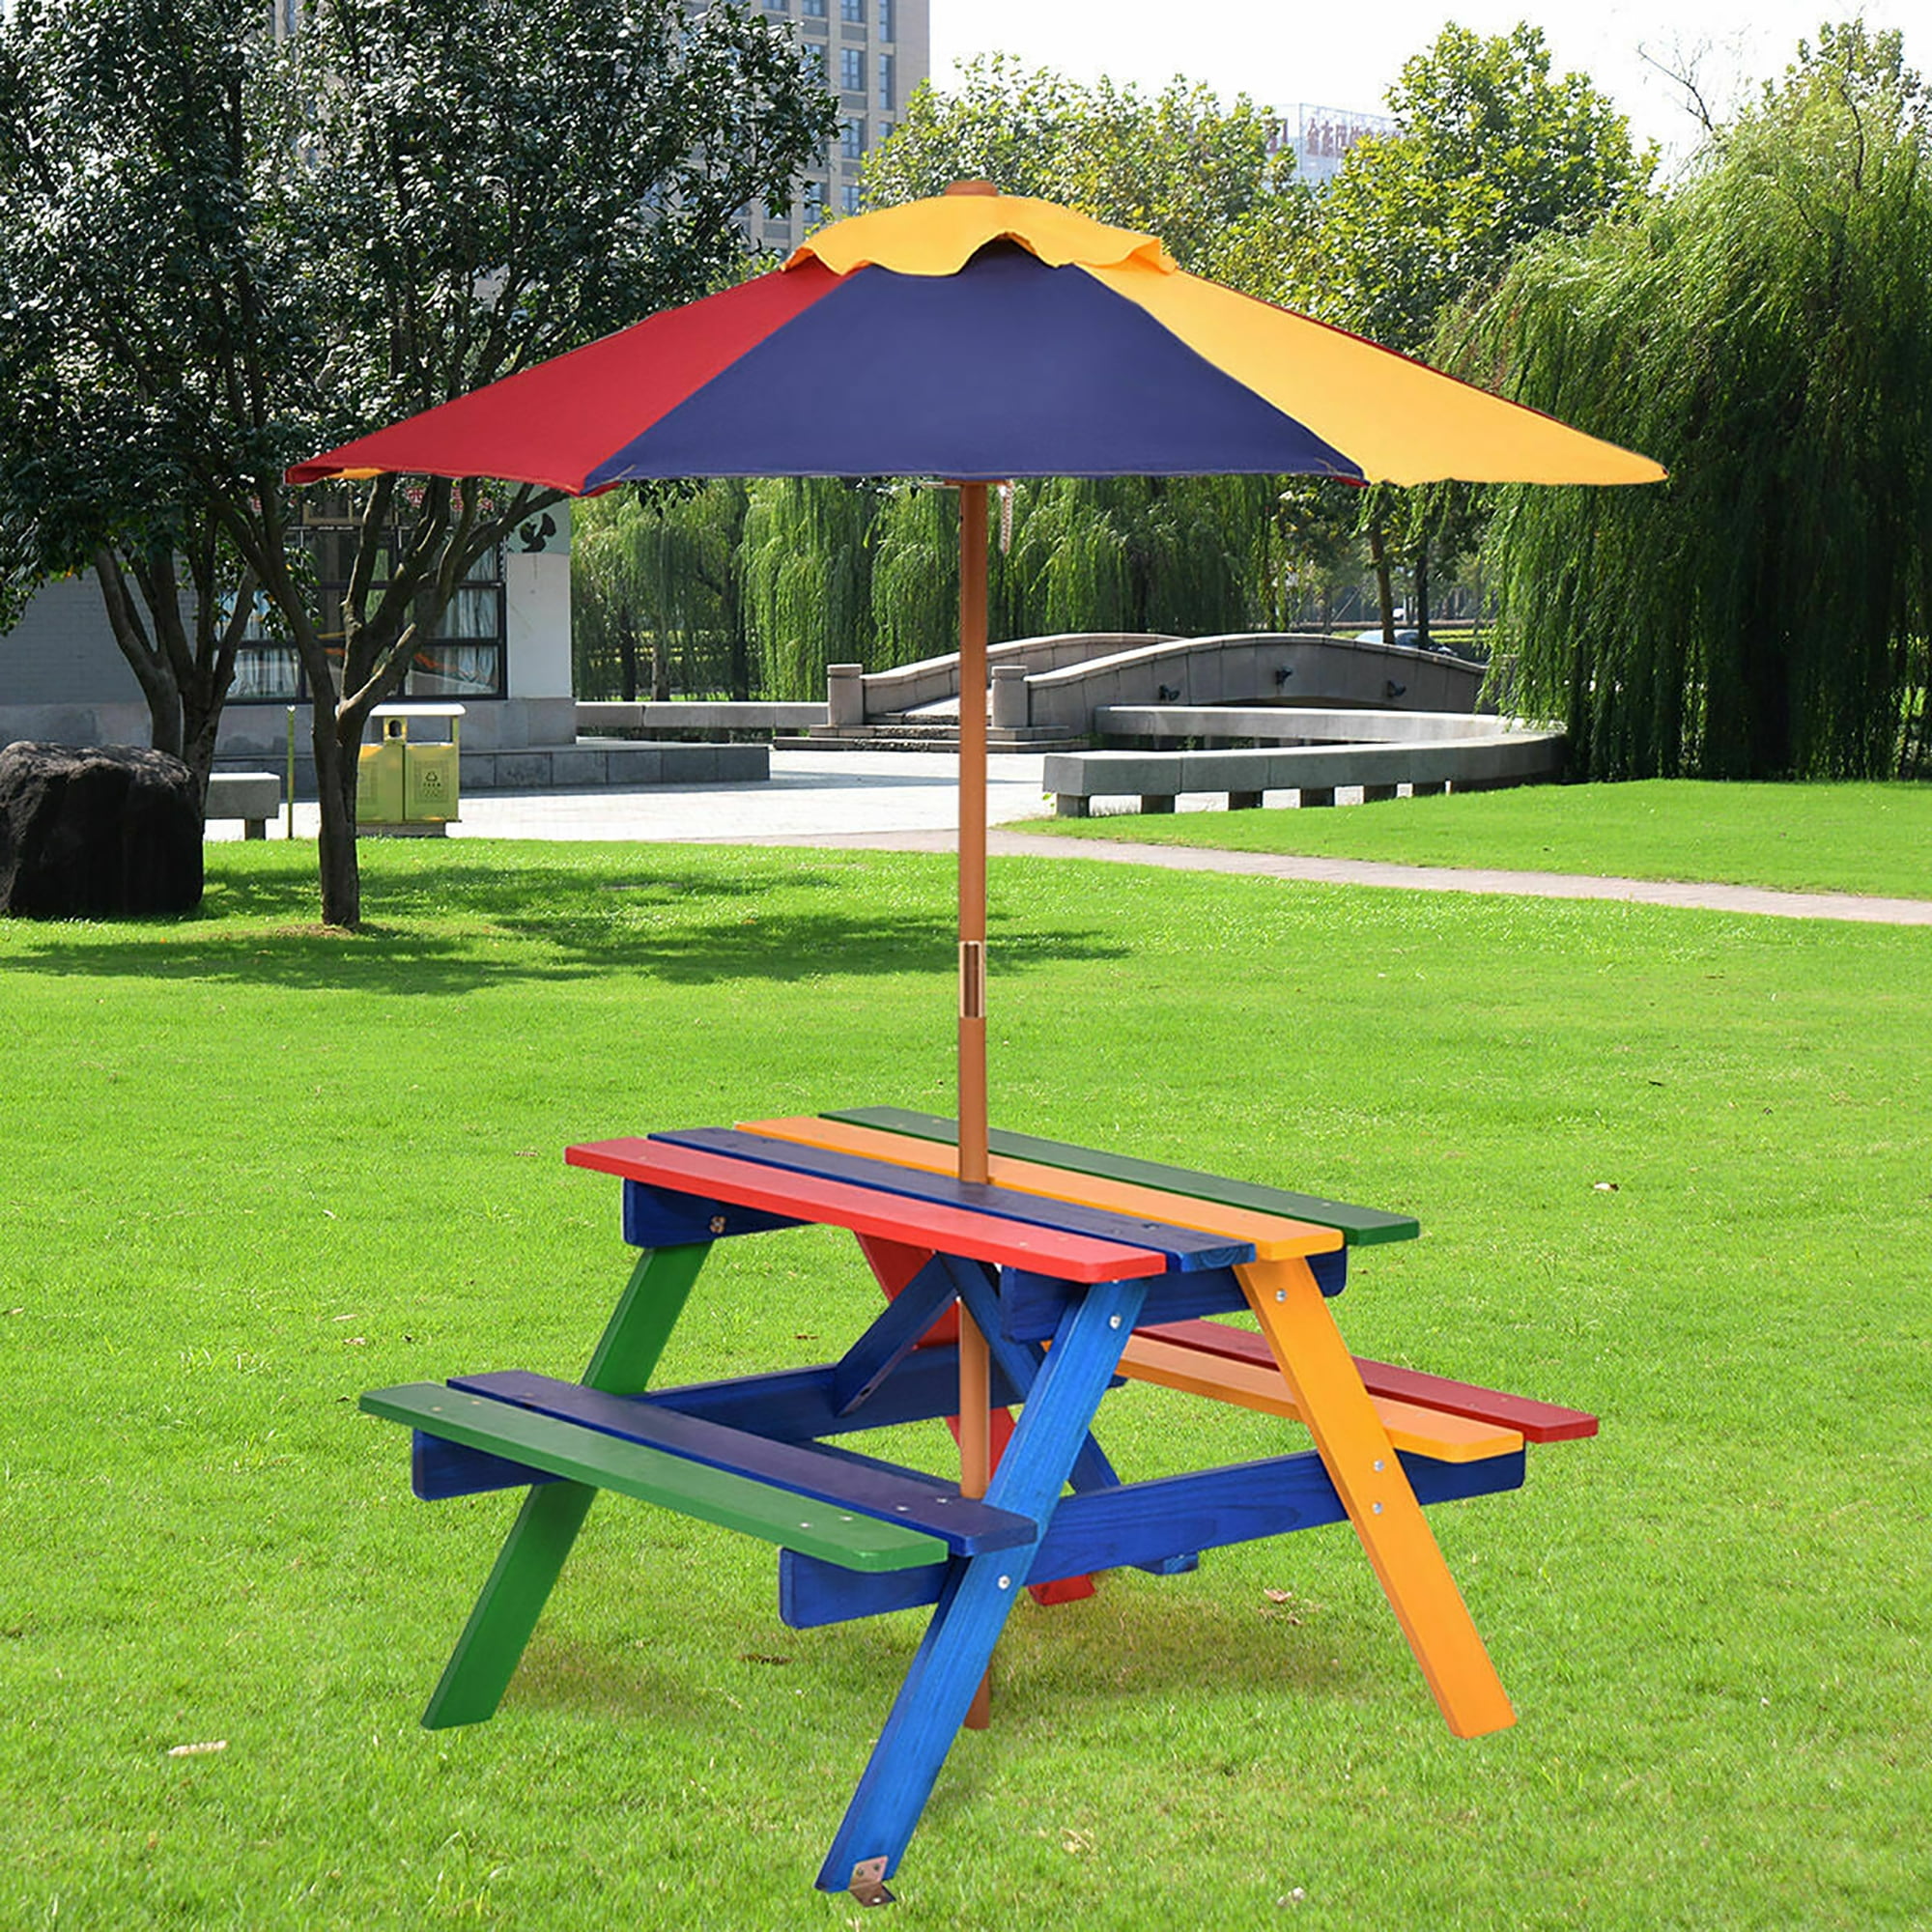 Childs Wood Picnic Table with Seat Cushions Kids Children's Outdoor Furniture 